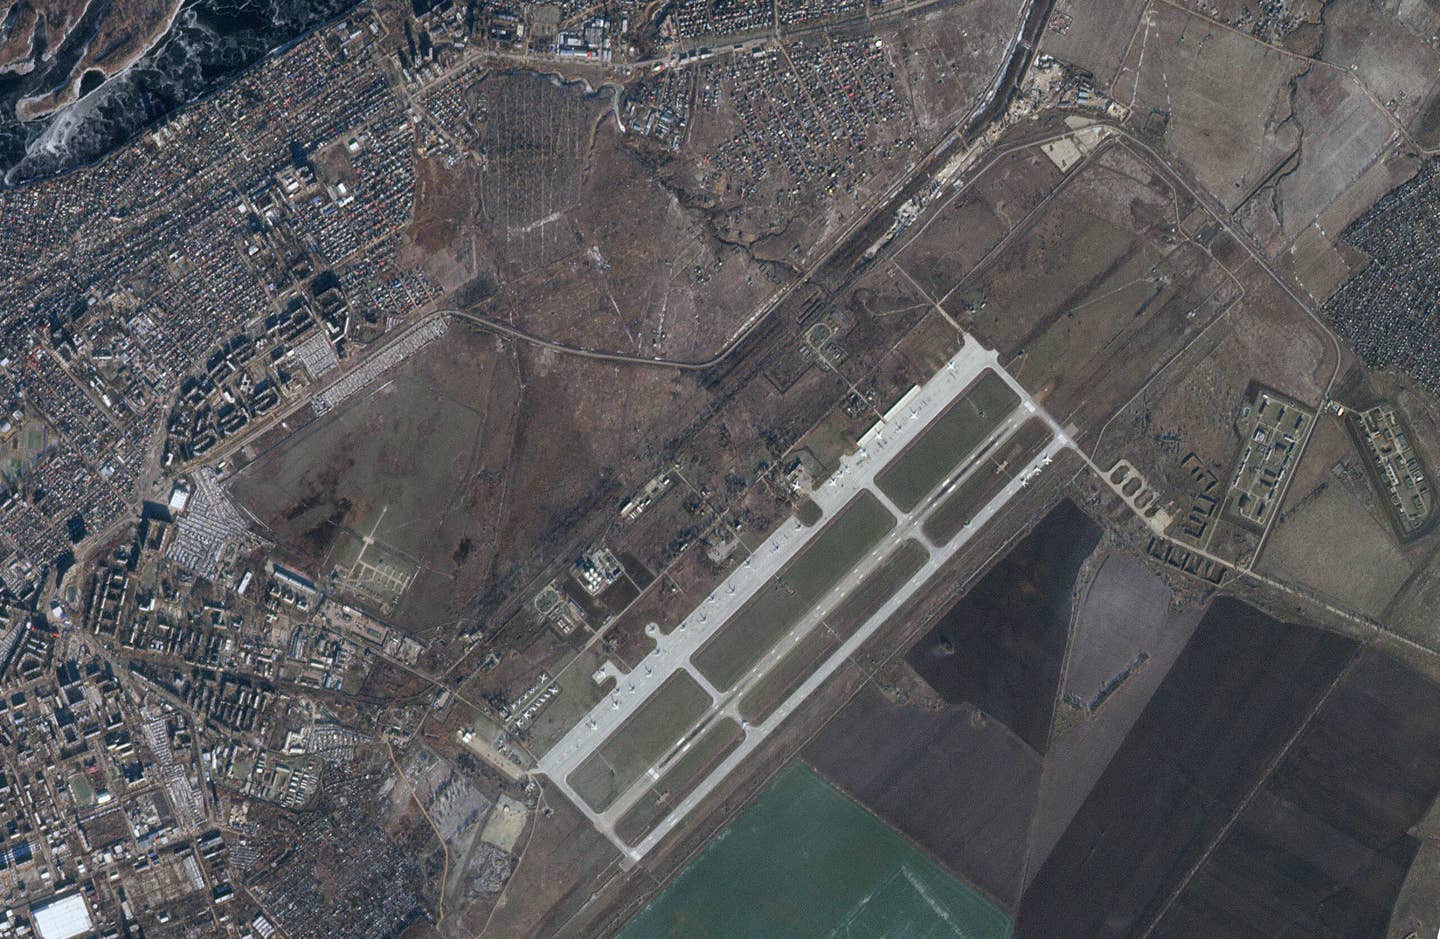 A satellite image of Engels Air Base from shortly after the time of the apparent blast does not reveal any significant damage. <em>PHOTO © 2022 PLANET LABS INC. ALL RIGHTS RESERVED. REPRINTED BY PERMISSION</em>